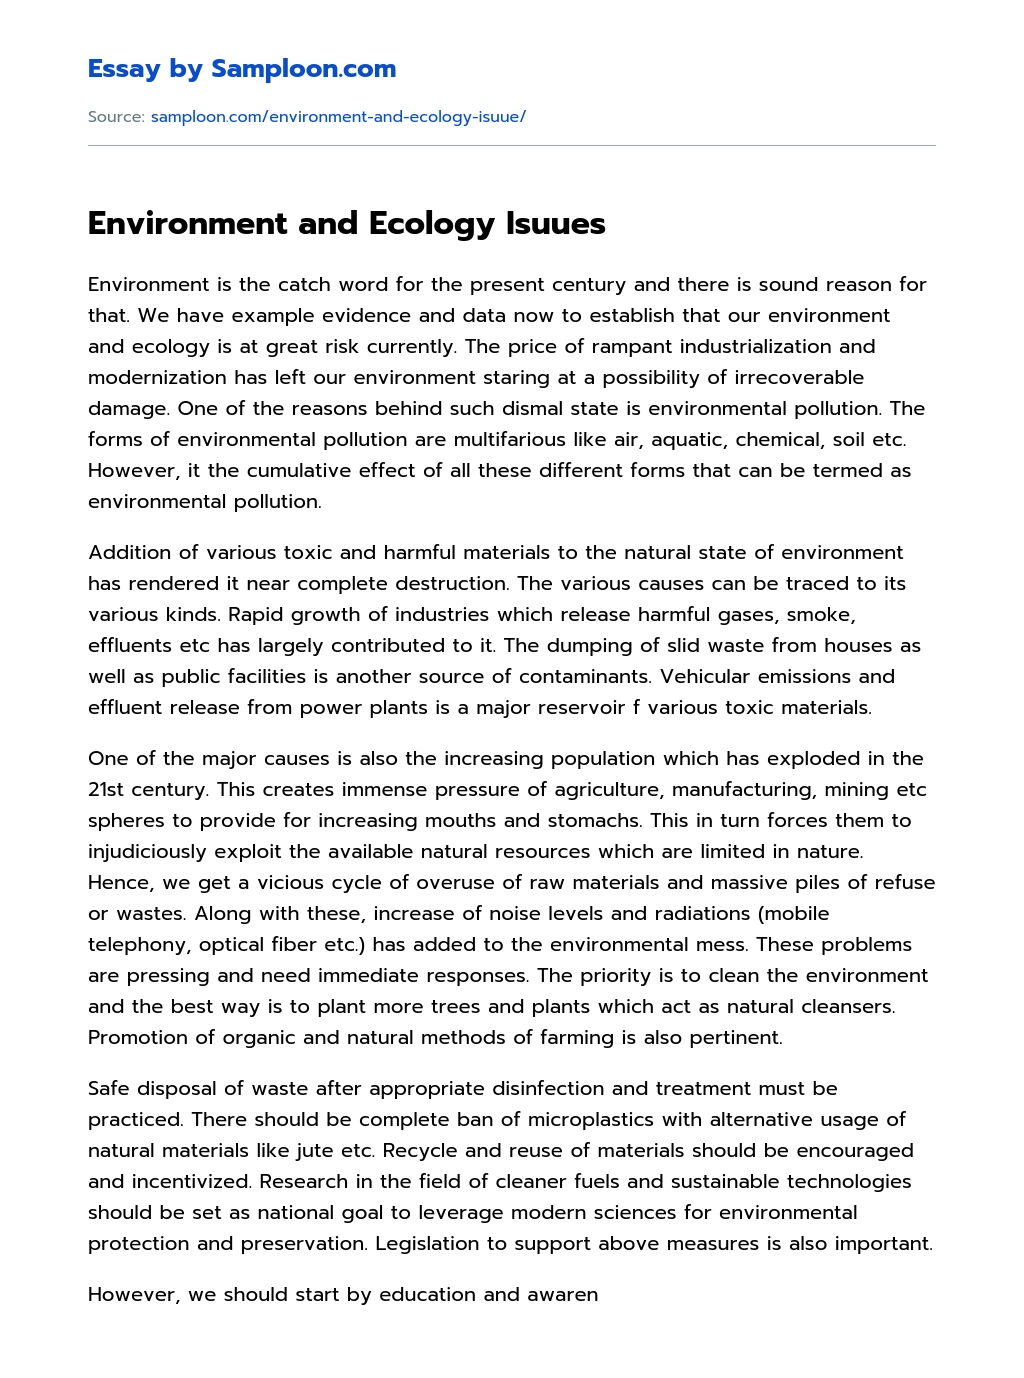 Environment and Ecology Isuues essay